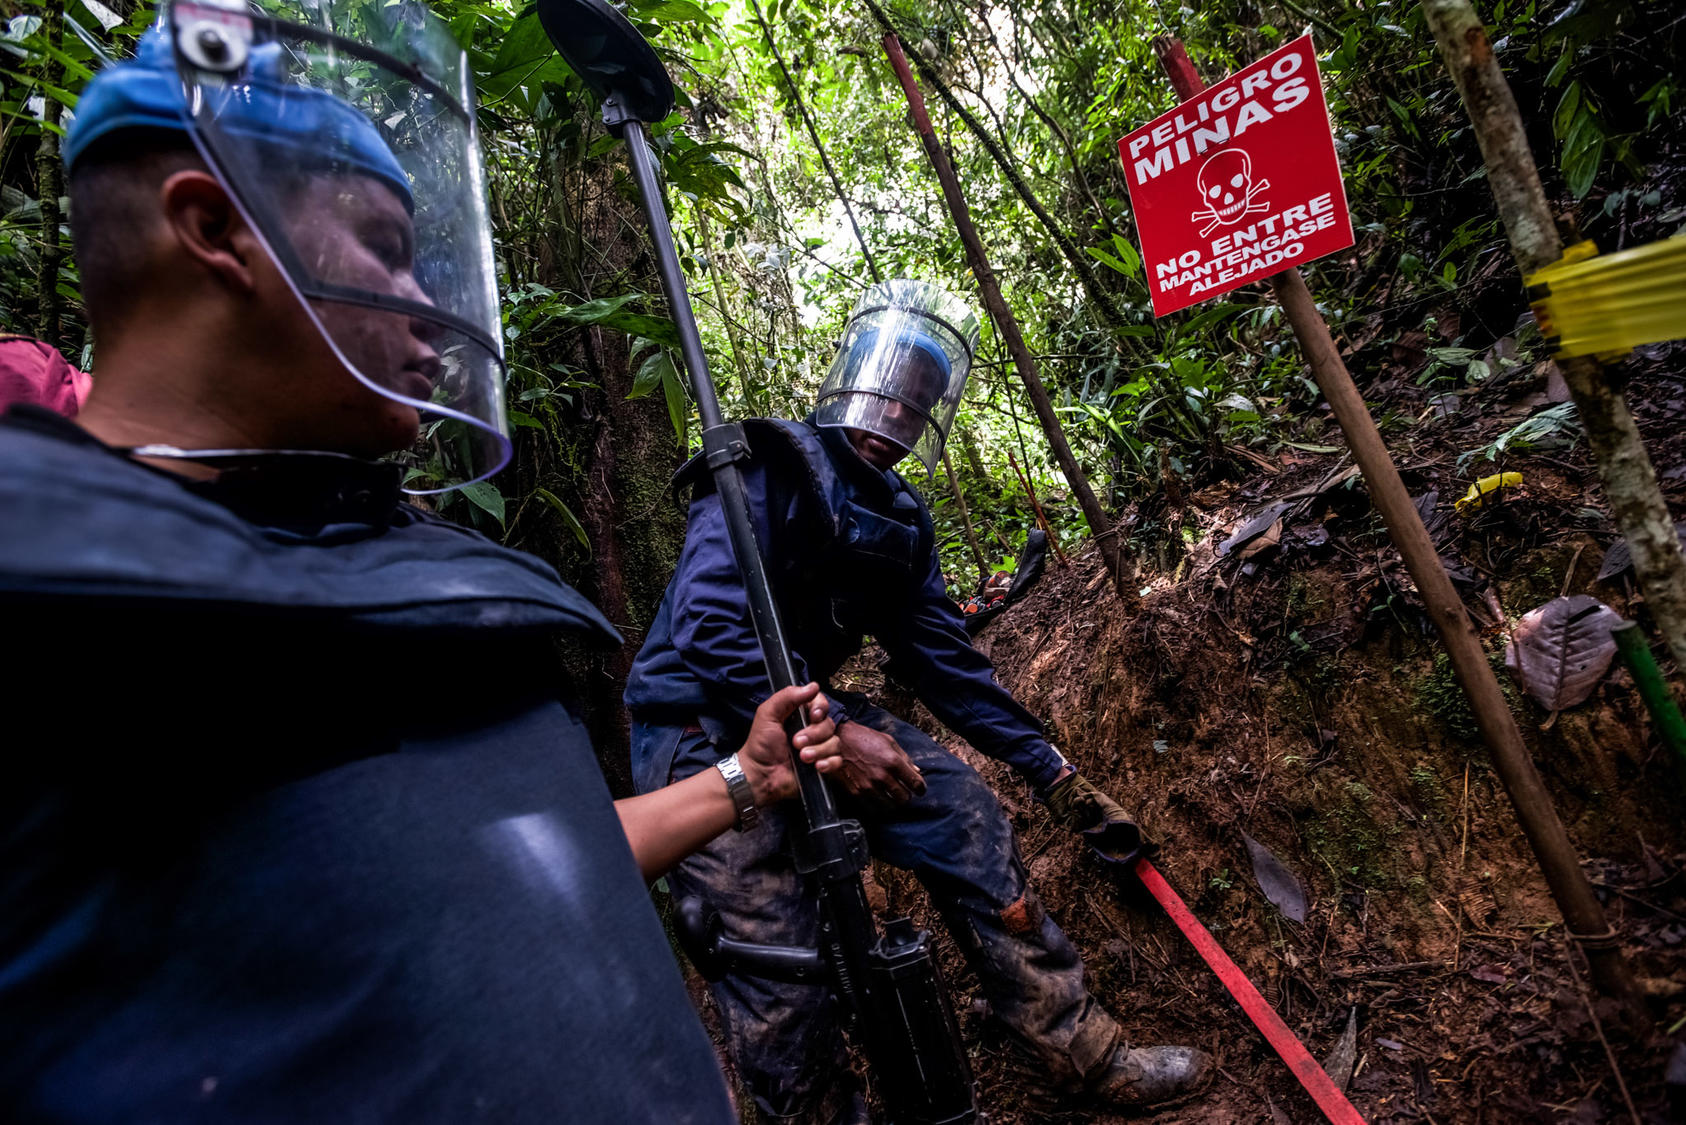 Luvin Mejia, a member of an army battalion that searches for land mines in now-peaceful areas once disputed by guerrilla fighters, uses a metal detector in the mountains outside of Cocorna, Colombia, April 9, 2015. In Colombia, a country with one of the highest numbers of land mine victims in the world, the government and the country’s largest rebel group, the Revolutionary Armed Forces of Colombia, or FARC, agreed to find and destroy land mines laid by the guerrillas.